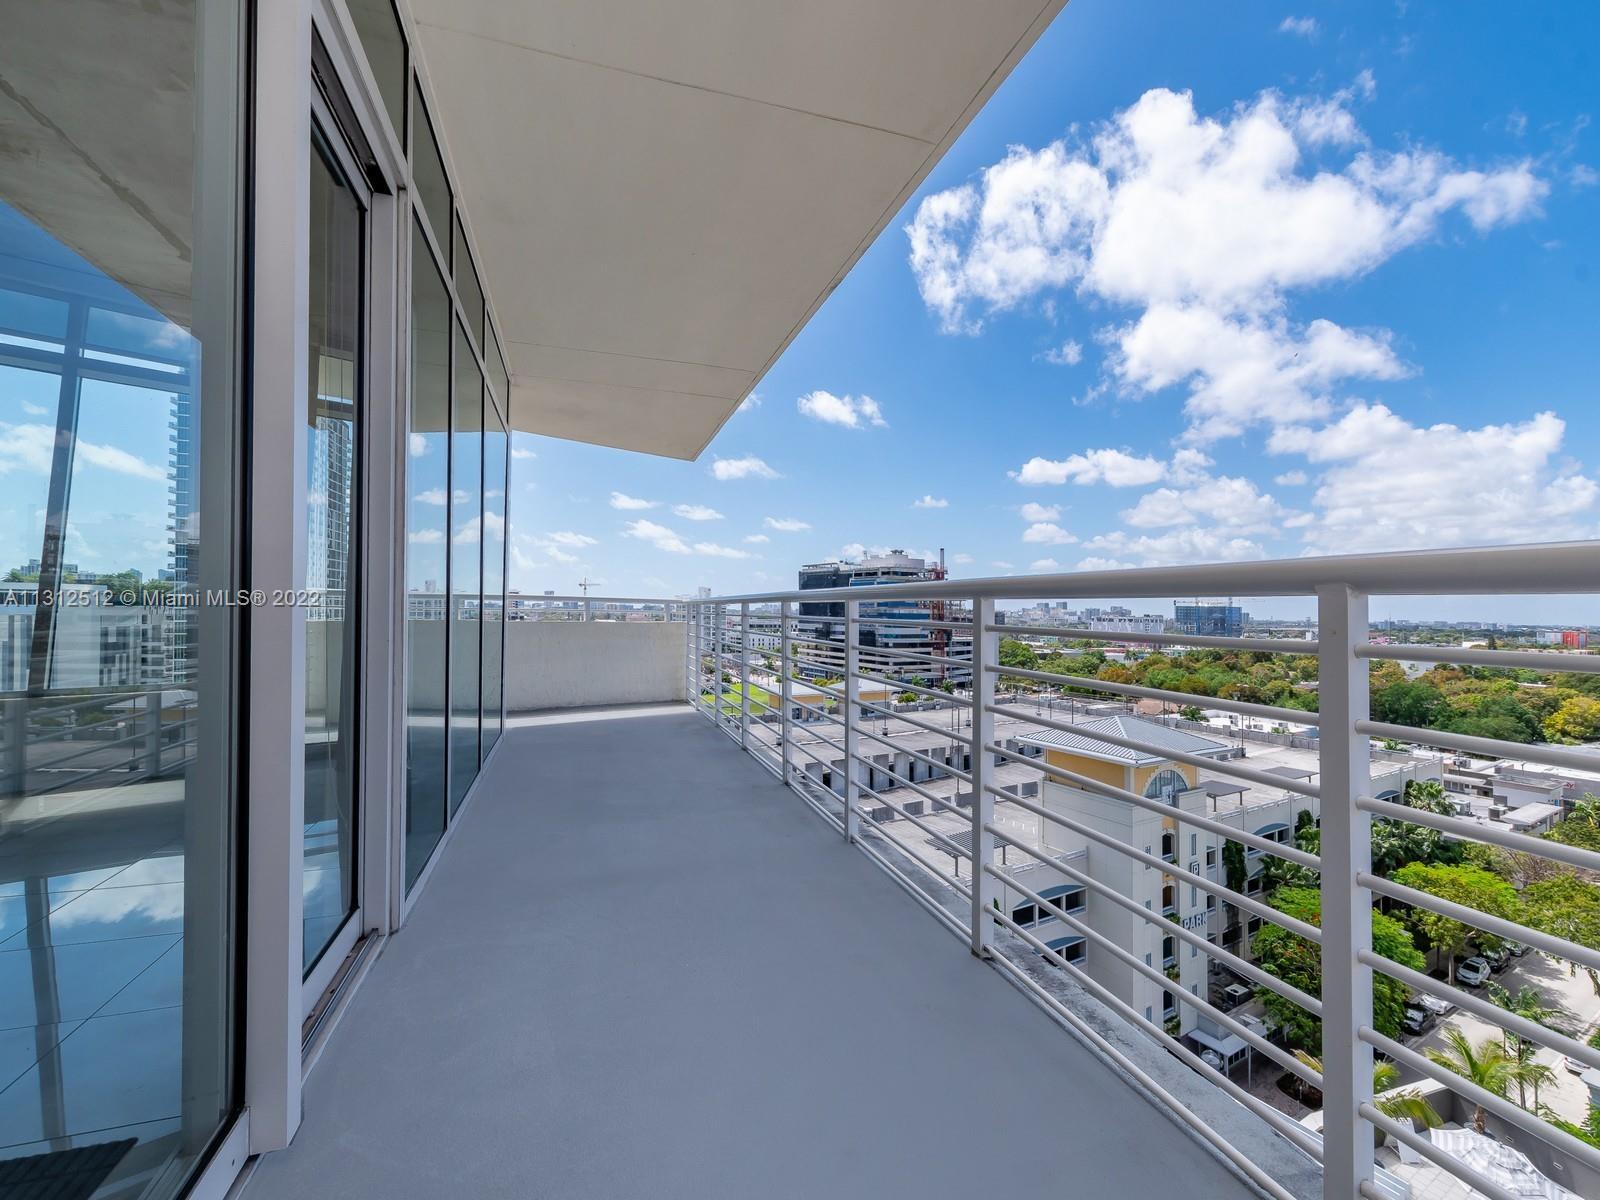 Live in the heart of Midtown and enjoy all the neighborhood has to offer while soaking in the Miami 